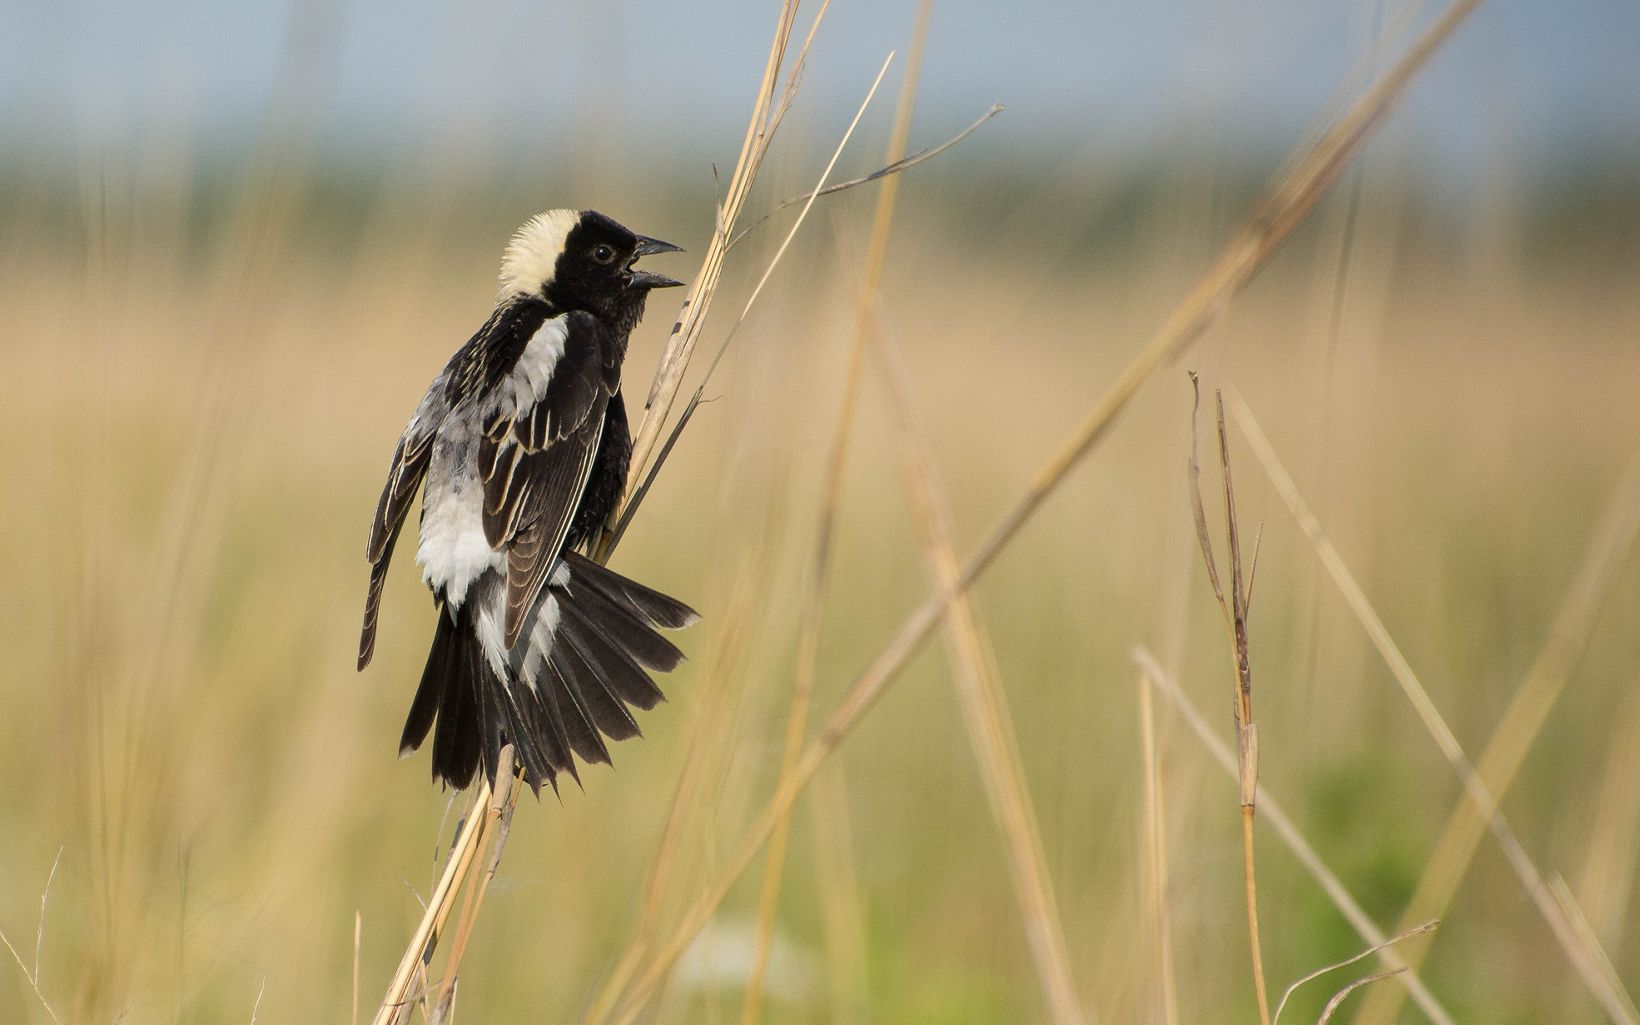 A black bird with a white crown and back perches on a tall grass frond.